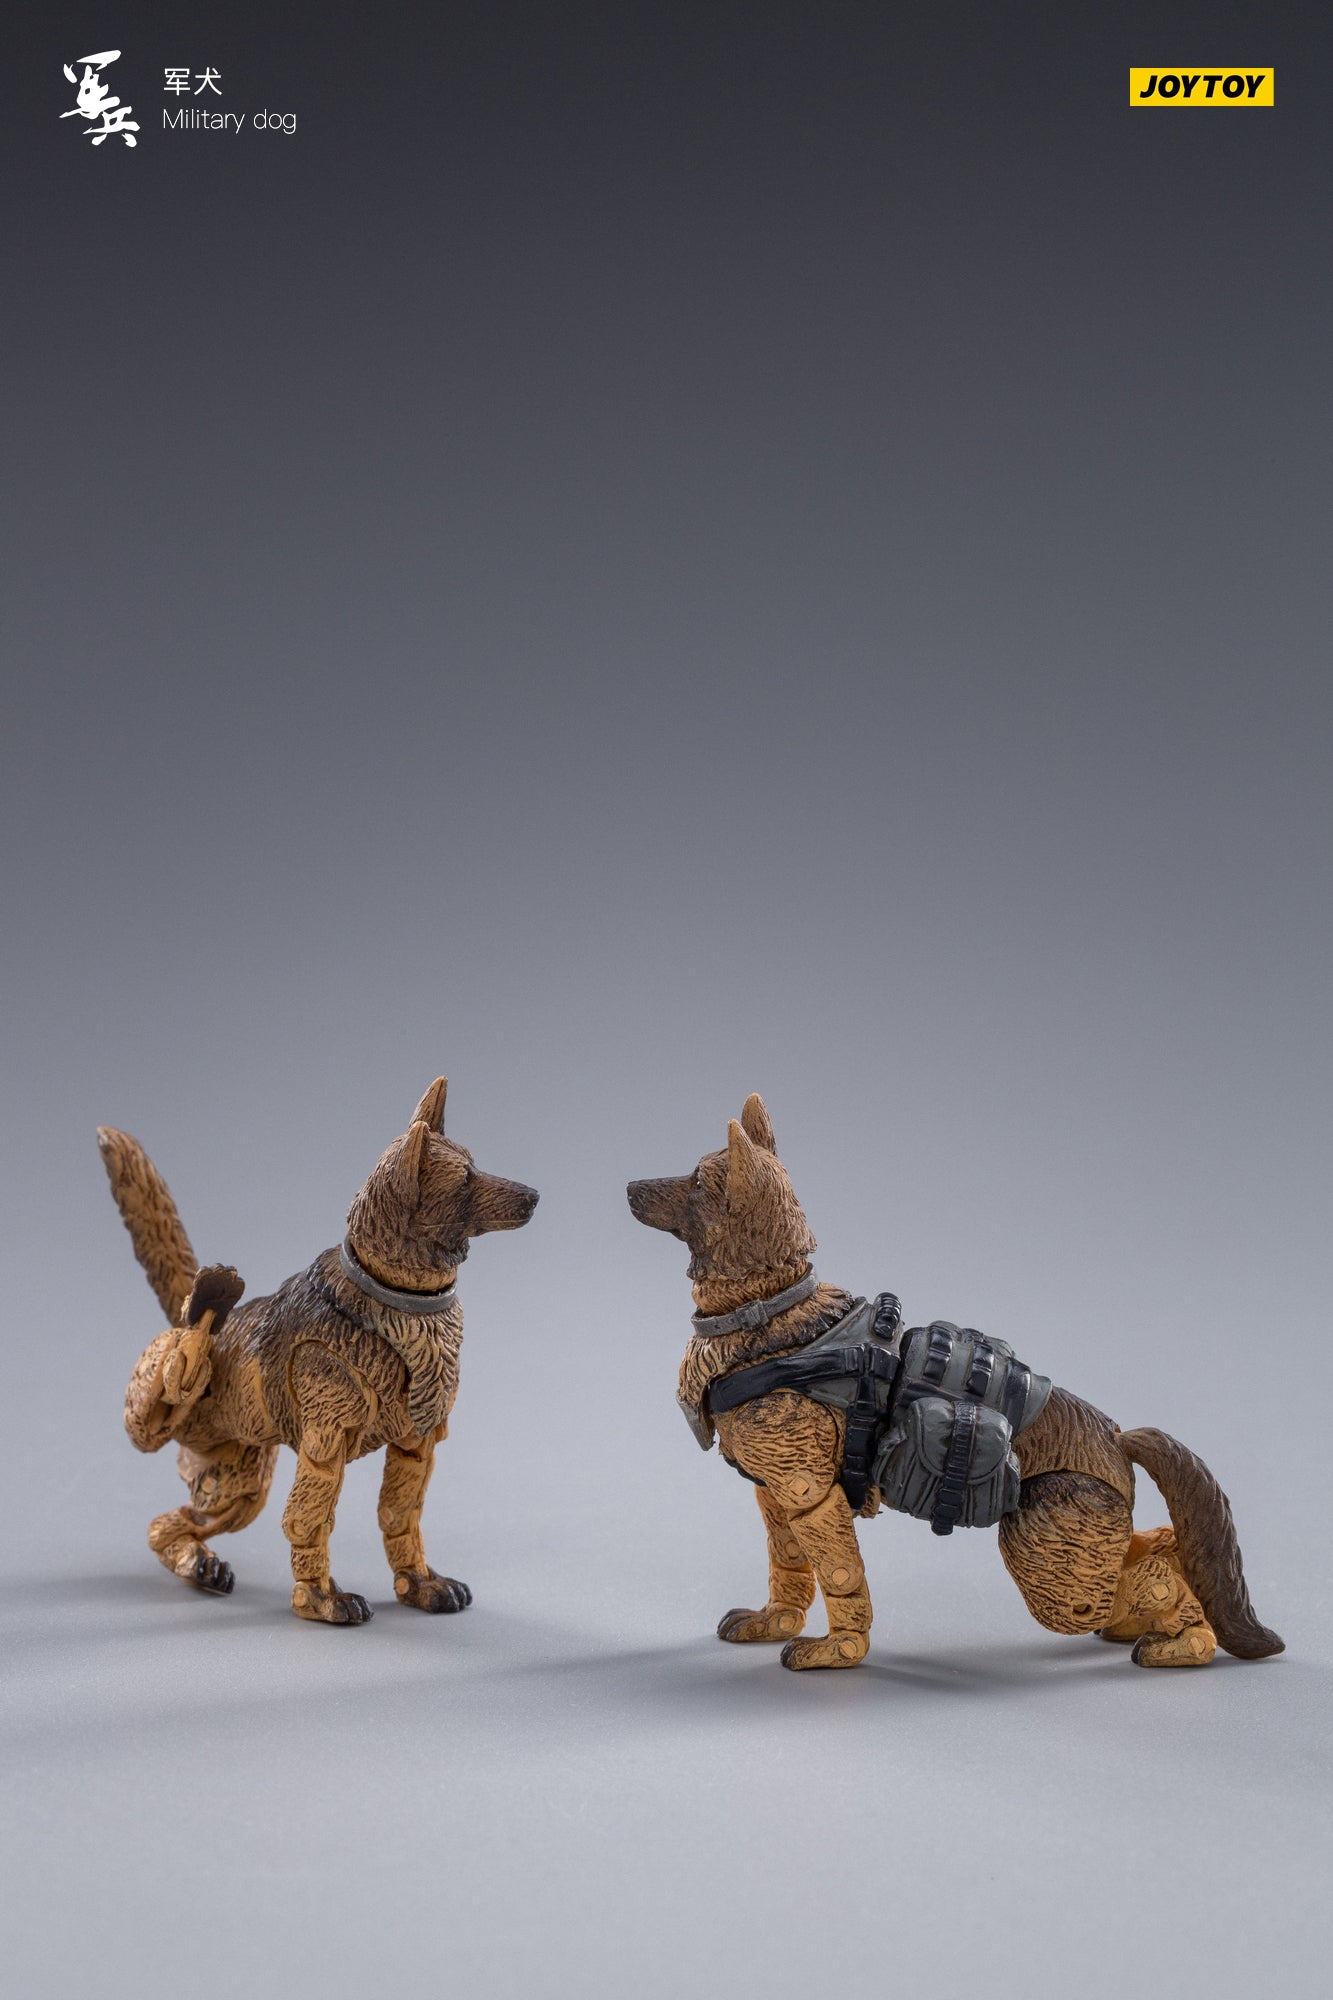 Military Dog - Soldier Action Figure By JOYTOY